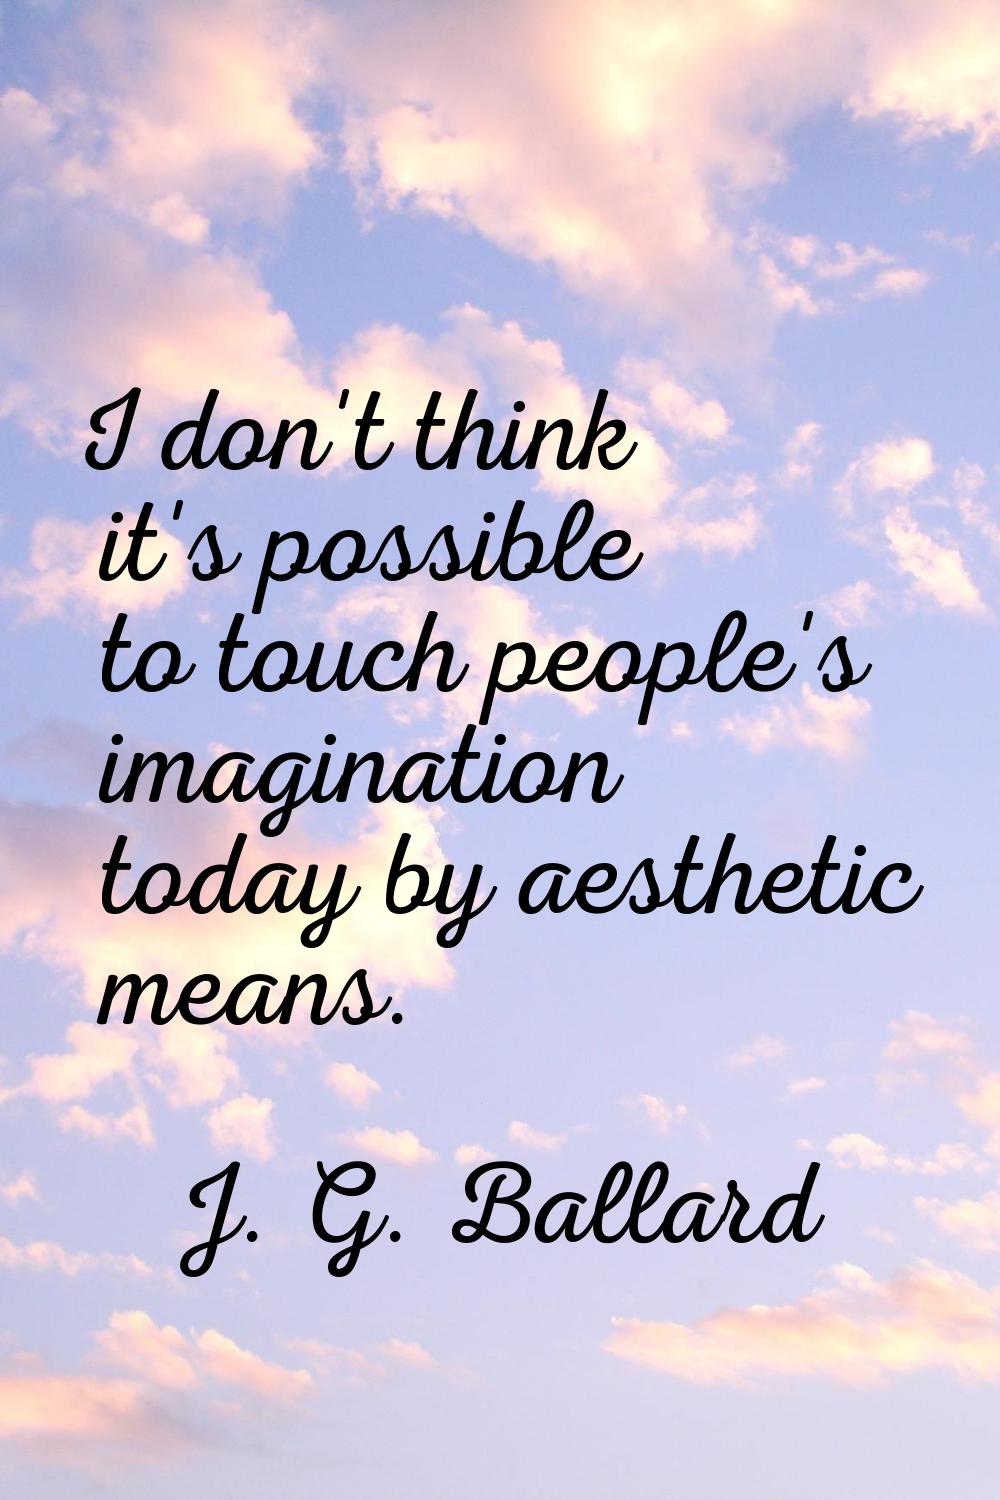 I don't think it's possible to touch people's imagination today by aesthetic means.